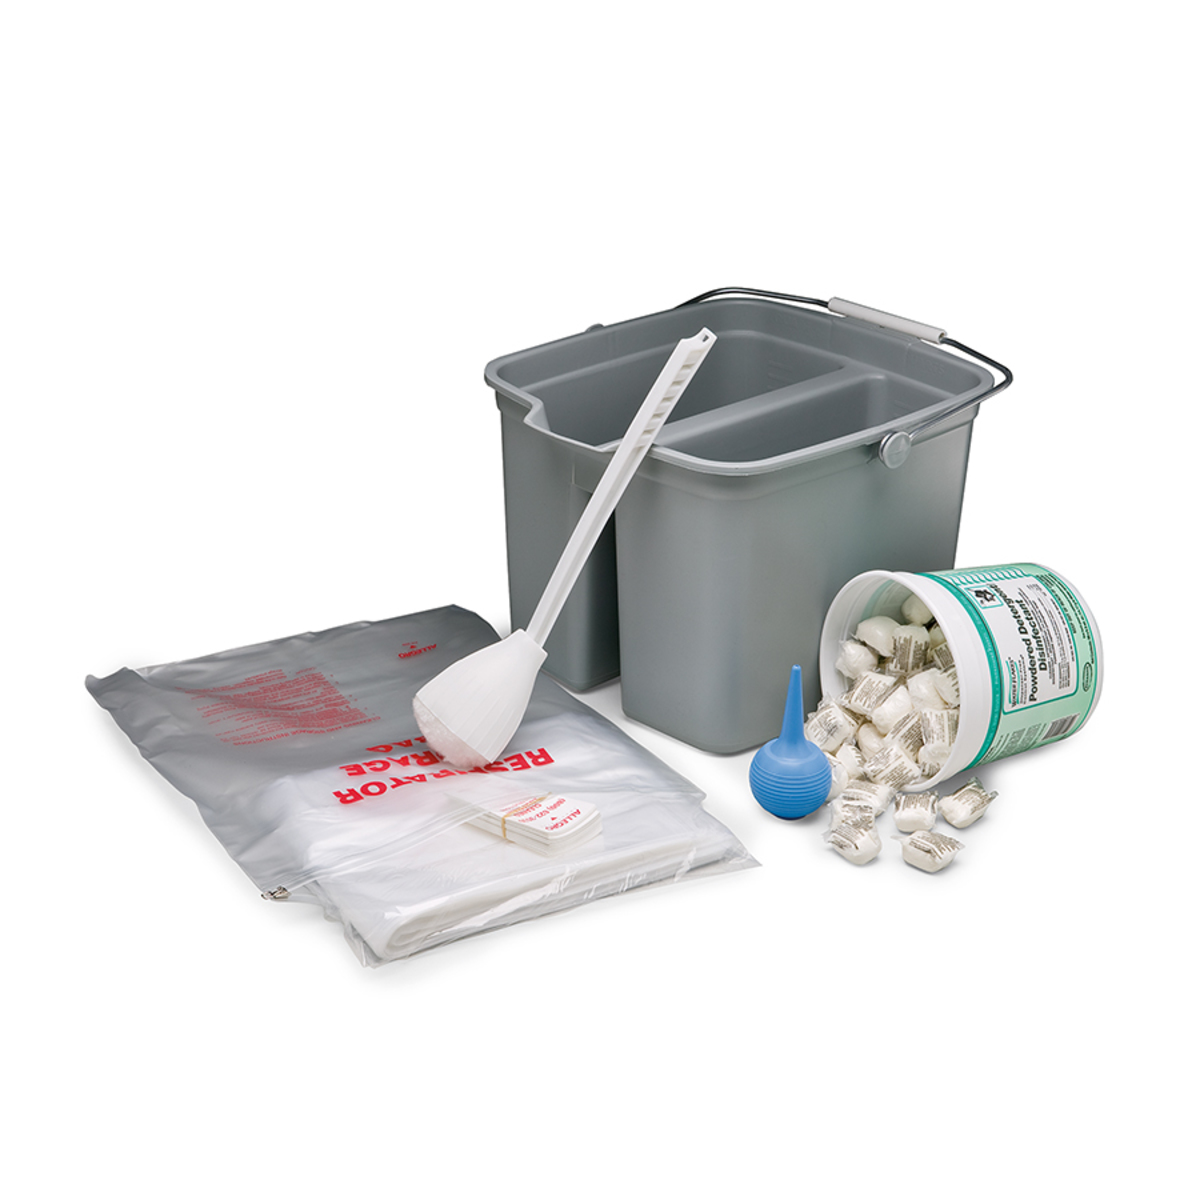 Allegro® Respirator Cleaning Kit For Allegro® Full Face And Half Mask Respirator Respirators (Availability restrictions apply.)